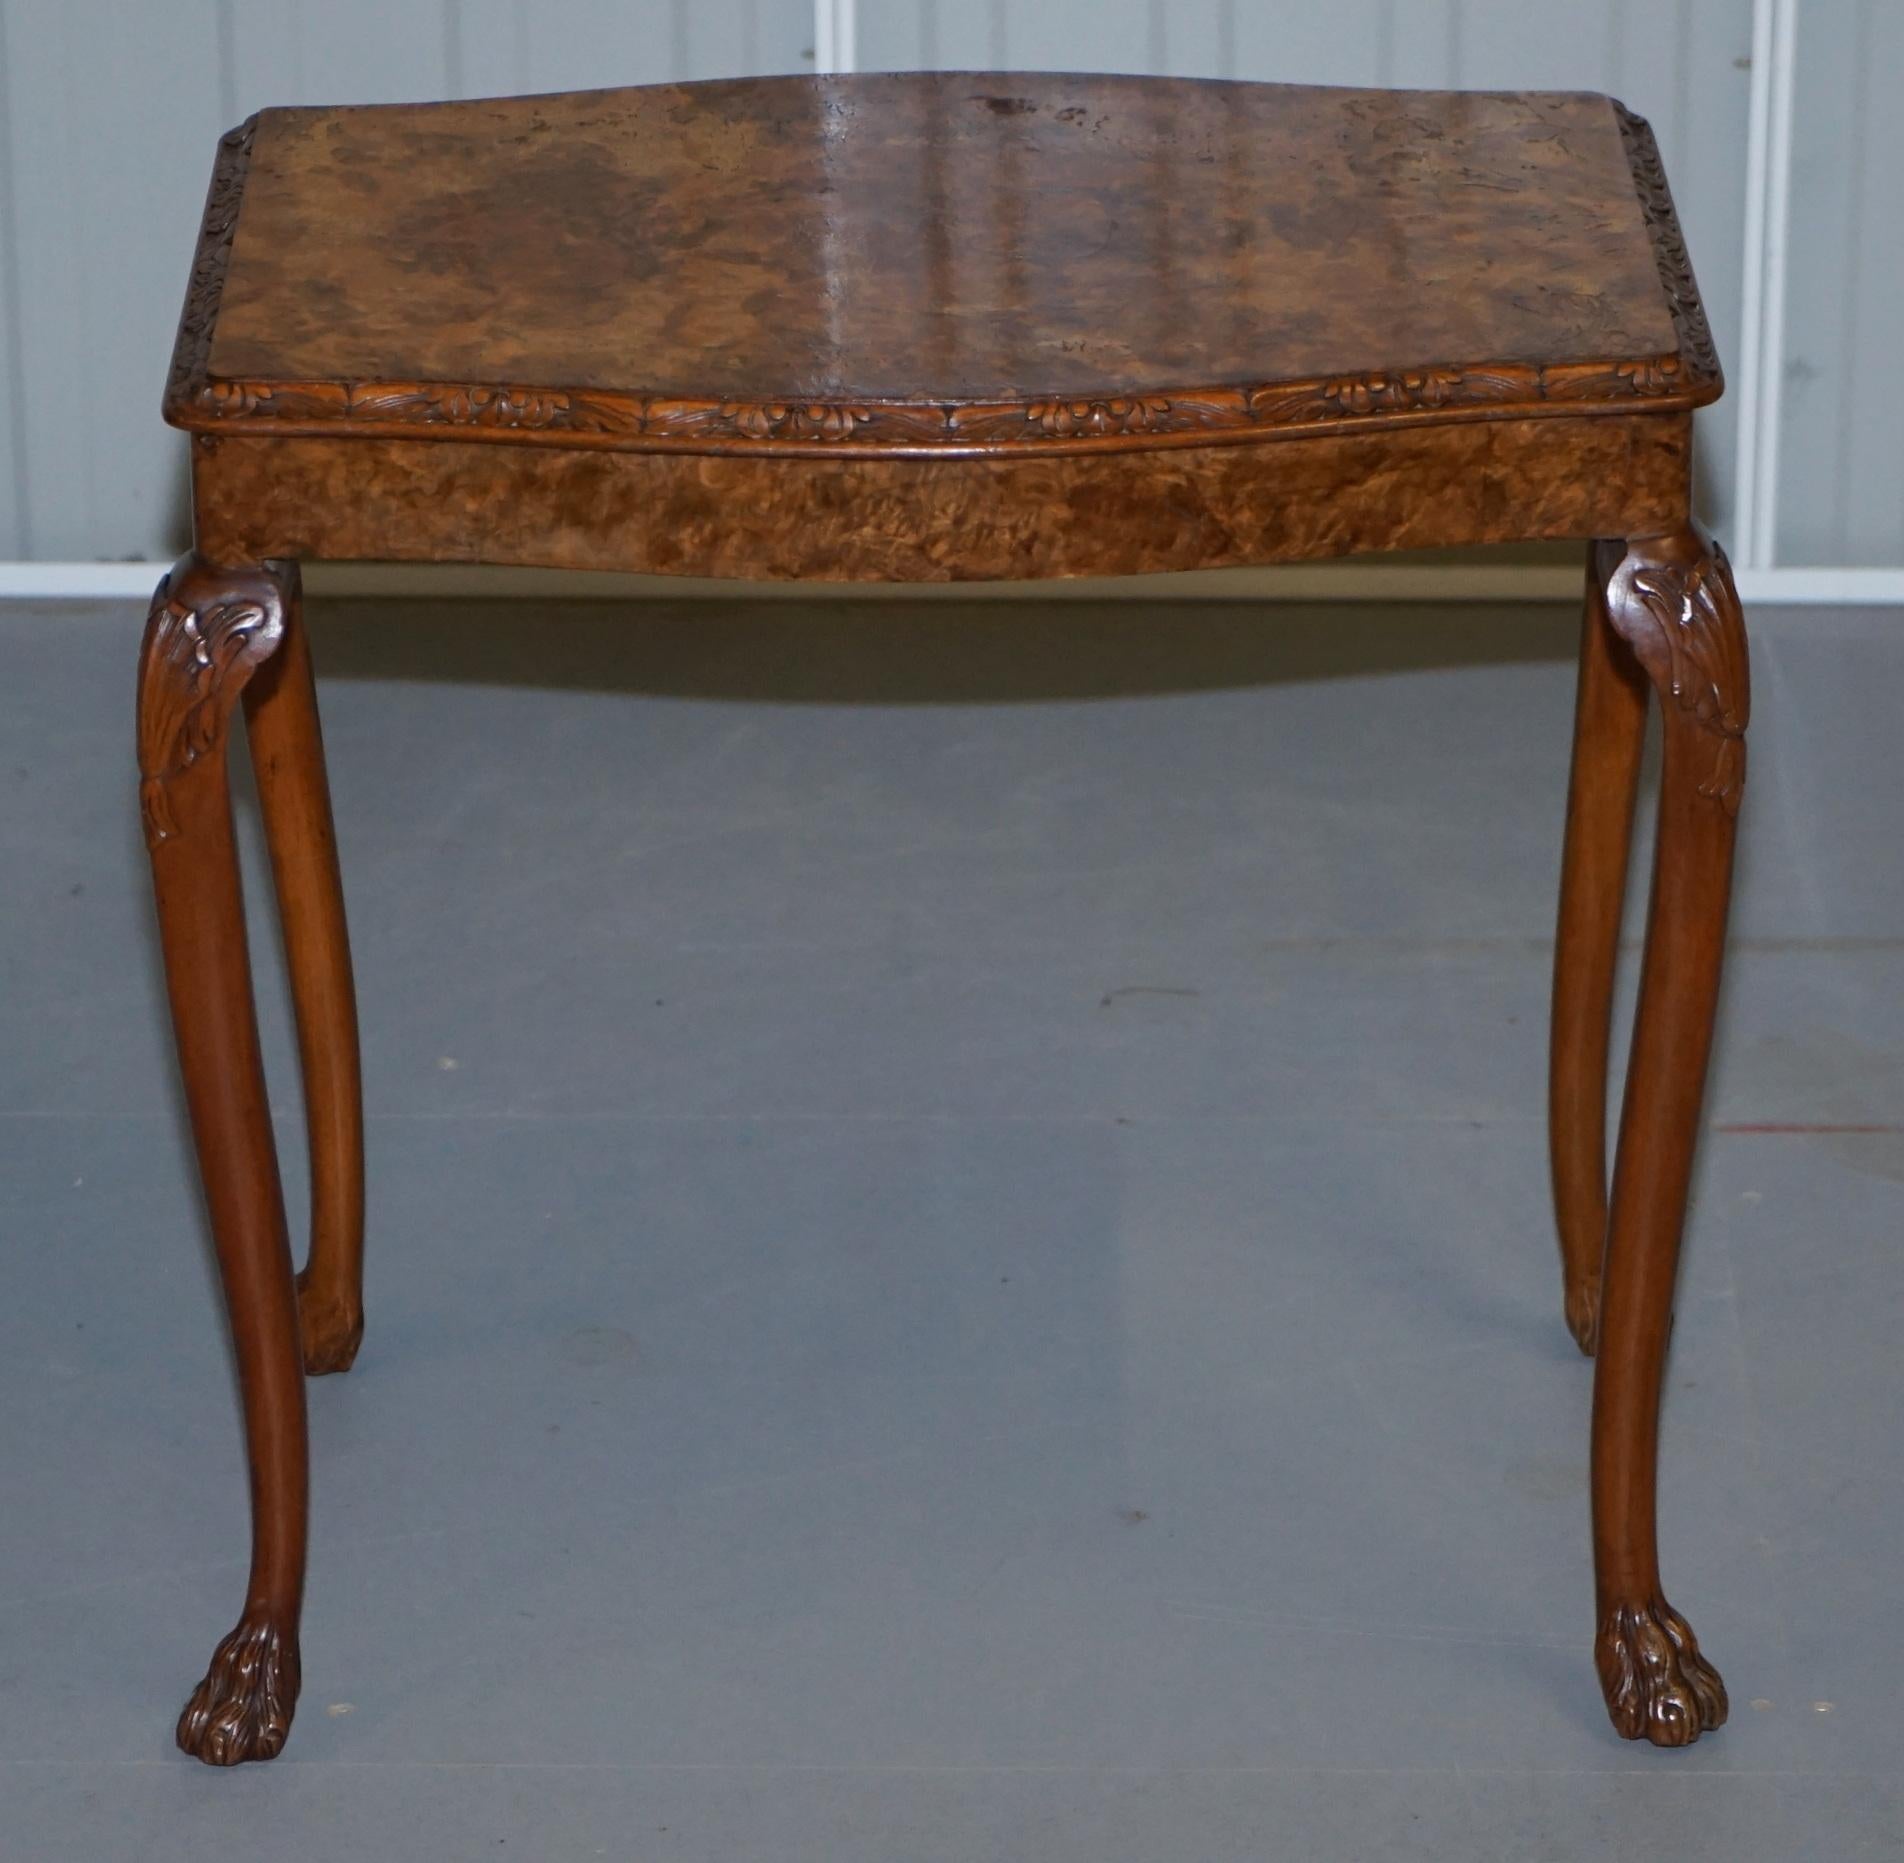 We are delighted to offer for sale this lovely vintage burr walnut side table with ornately carved frame and lion hairy paw feet

A very good looking well made and decorative table, it was originally a nested table but now is on its own, you can